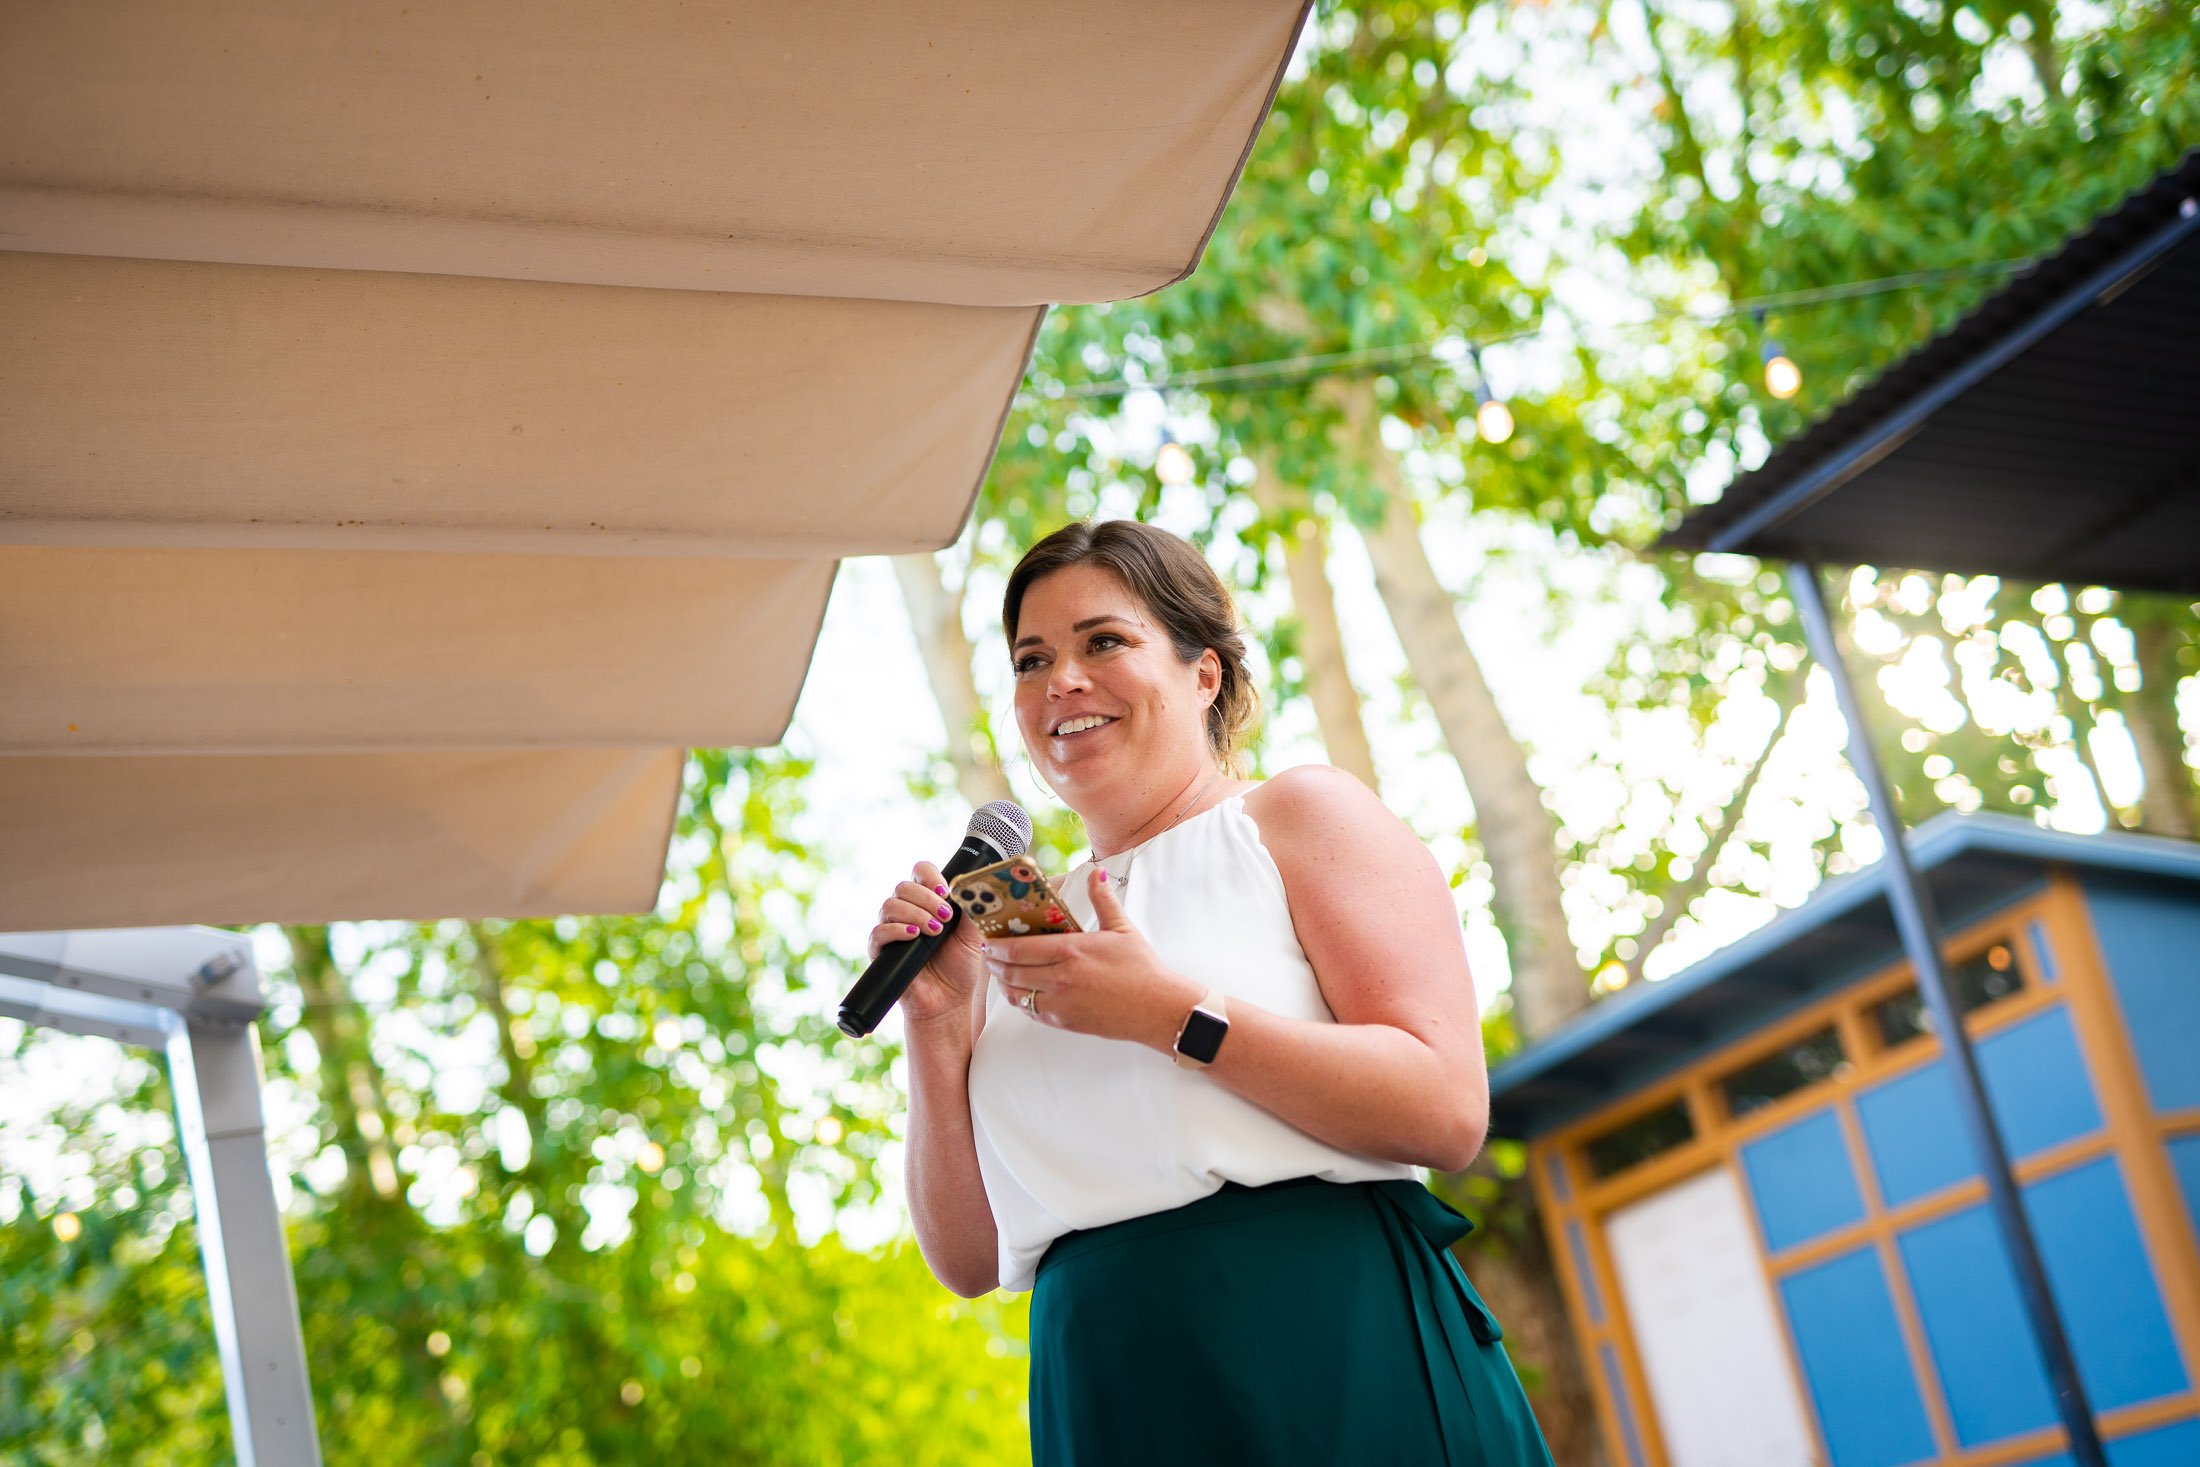 Maid of honor gives a speech while standing on an outdoor patio during the wedding reception, wedding, wedding photos, wedding photography, wedding photographer, wedding inspiration, wedding photo inspiration, wedding portraits, wedding ceremony, wedding reception, mountain wedding, Catholic Church wedding, Catholic Church wedding photos, Catholic Church wedding photography, Catholic Church wedding photographer, Catholic Church wedding inspiration, Catholic Church wedding venue, Steamboat Springs wedding, Steamboat Springs wedding photos, Steamboat Springs wedding photography, Steamboat Springs wedding photographer, Colorado wedding, Colorado wedding photos, Colorado wedding photography, Colorado wedding photographer, Colorado mountain wedding, Colorado wedding inspiration